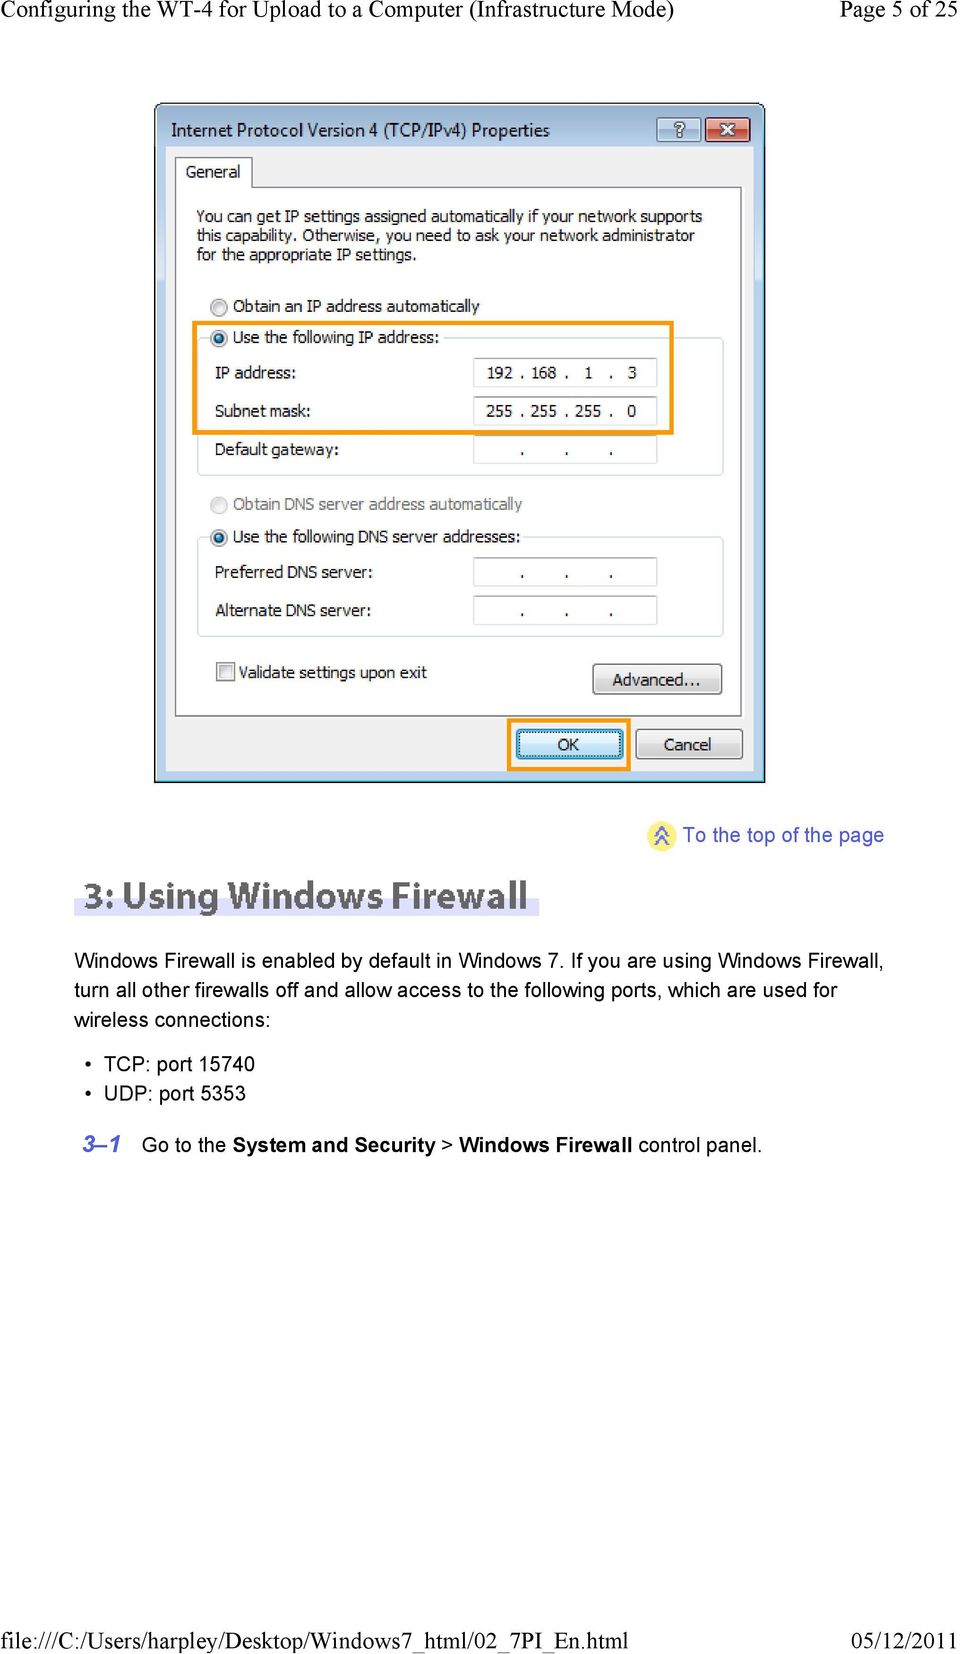 If you are using Windows Firewall, turn all other firewalls off and allow access to